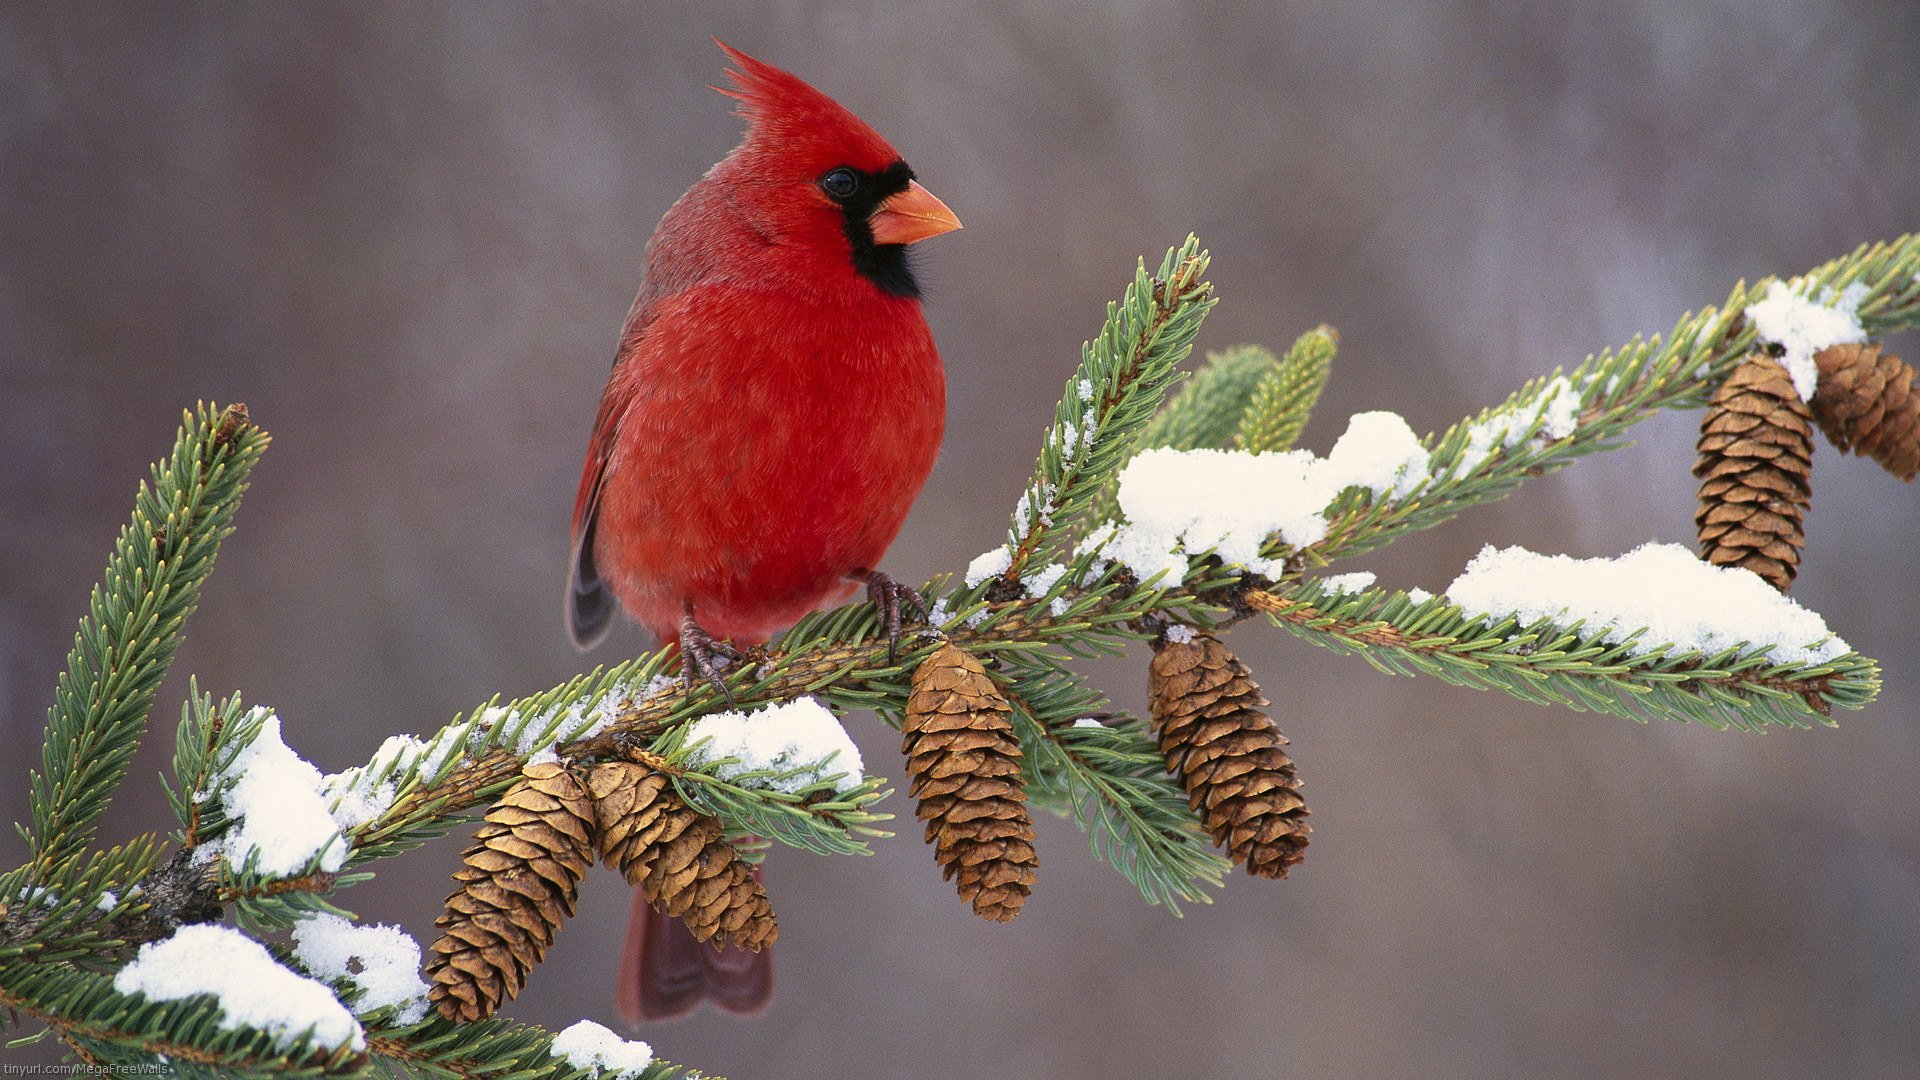 Red Cardinal Bird Is Standing On Tree Stick In Blur Background 4K HD Birds  Wallpapers  HD Wallpapers  ID 103538